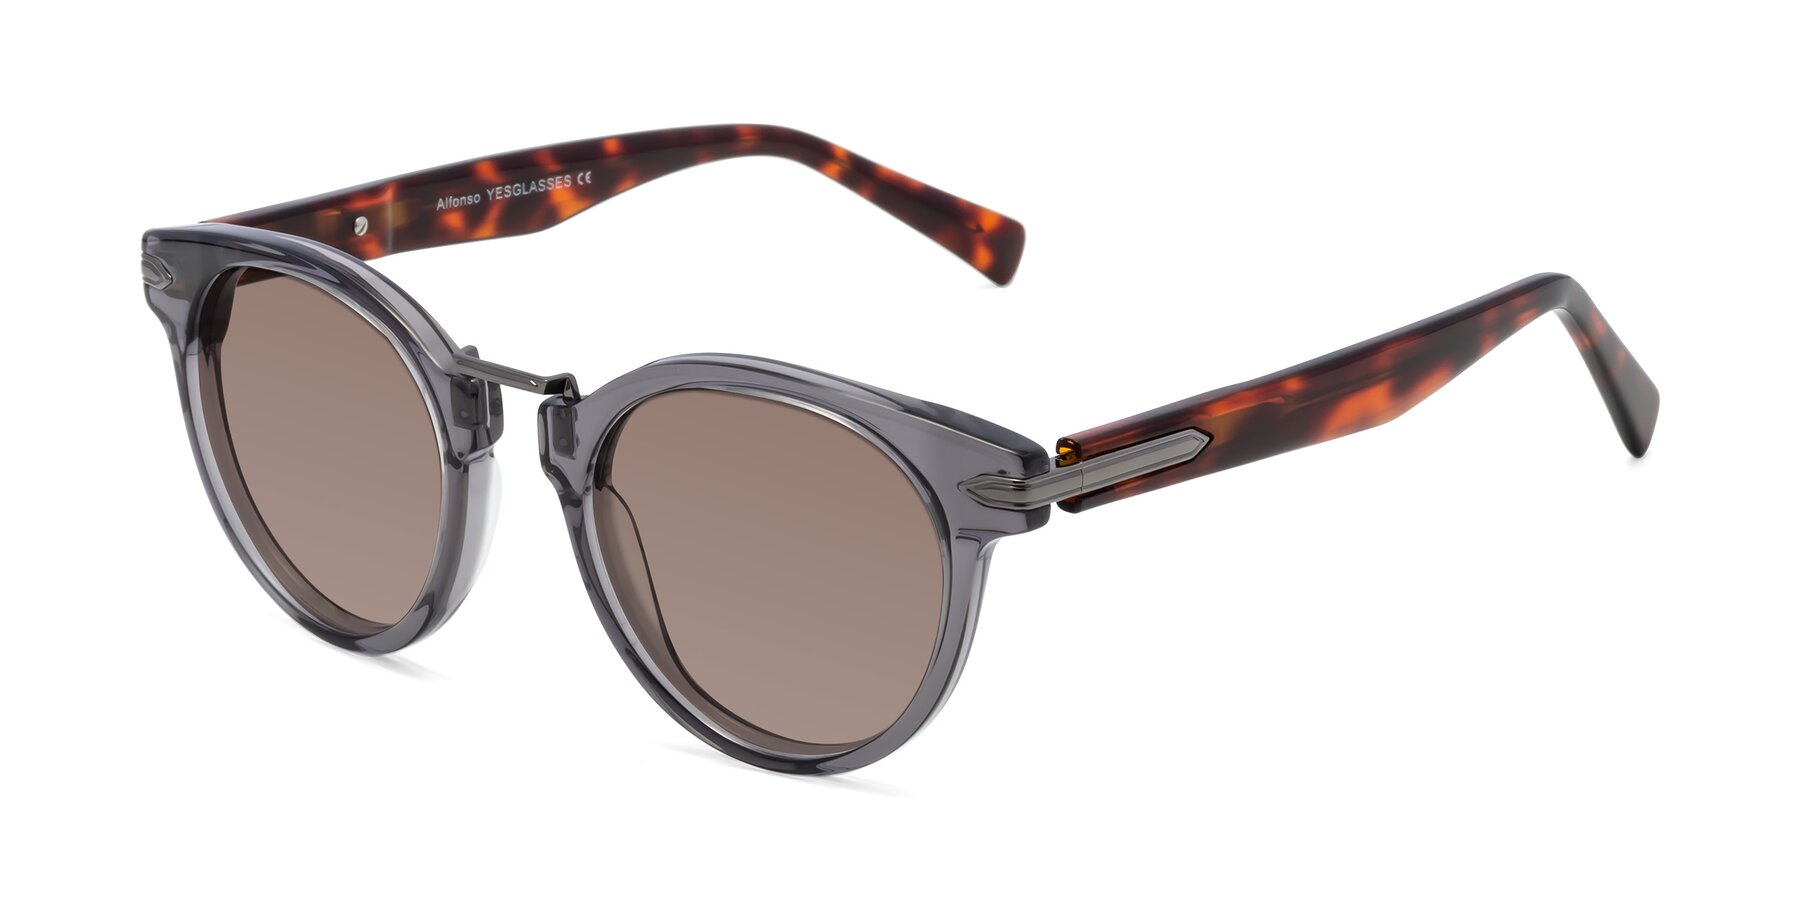 Angle of Alfonso in Gray /Tortoise with Medium Brown Tinted Lenses